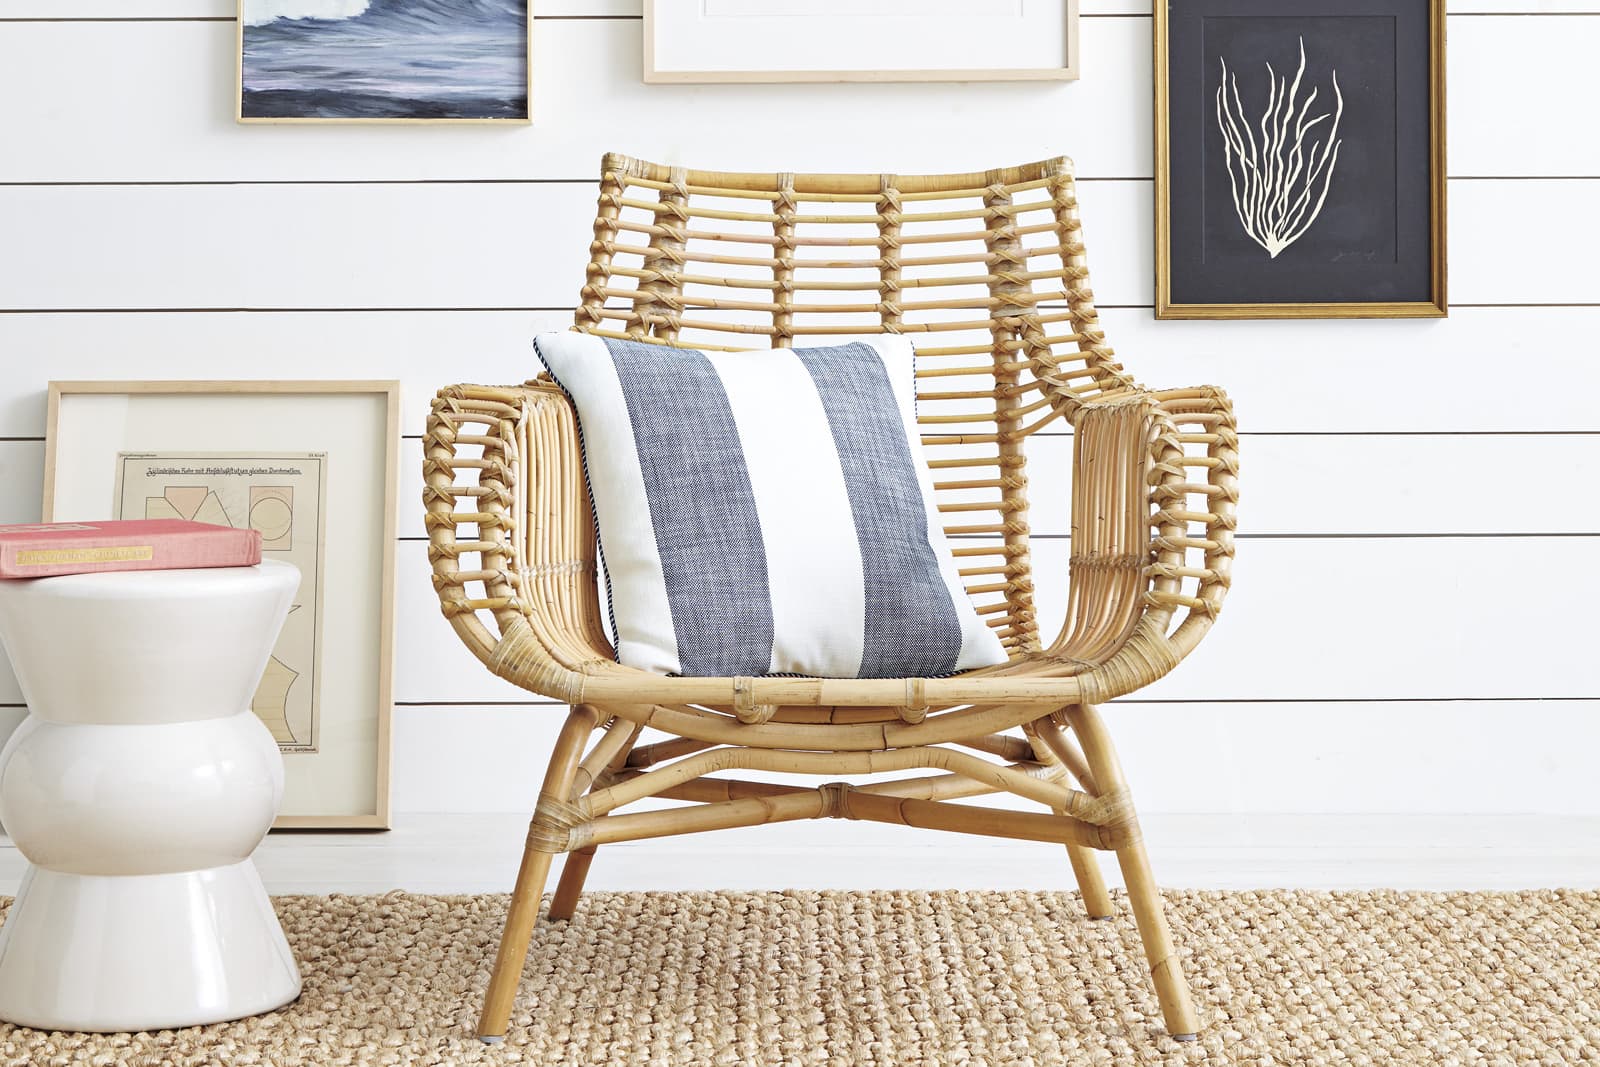 The Container Store - Our Bungee Chair is one of our top-rated